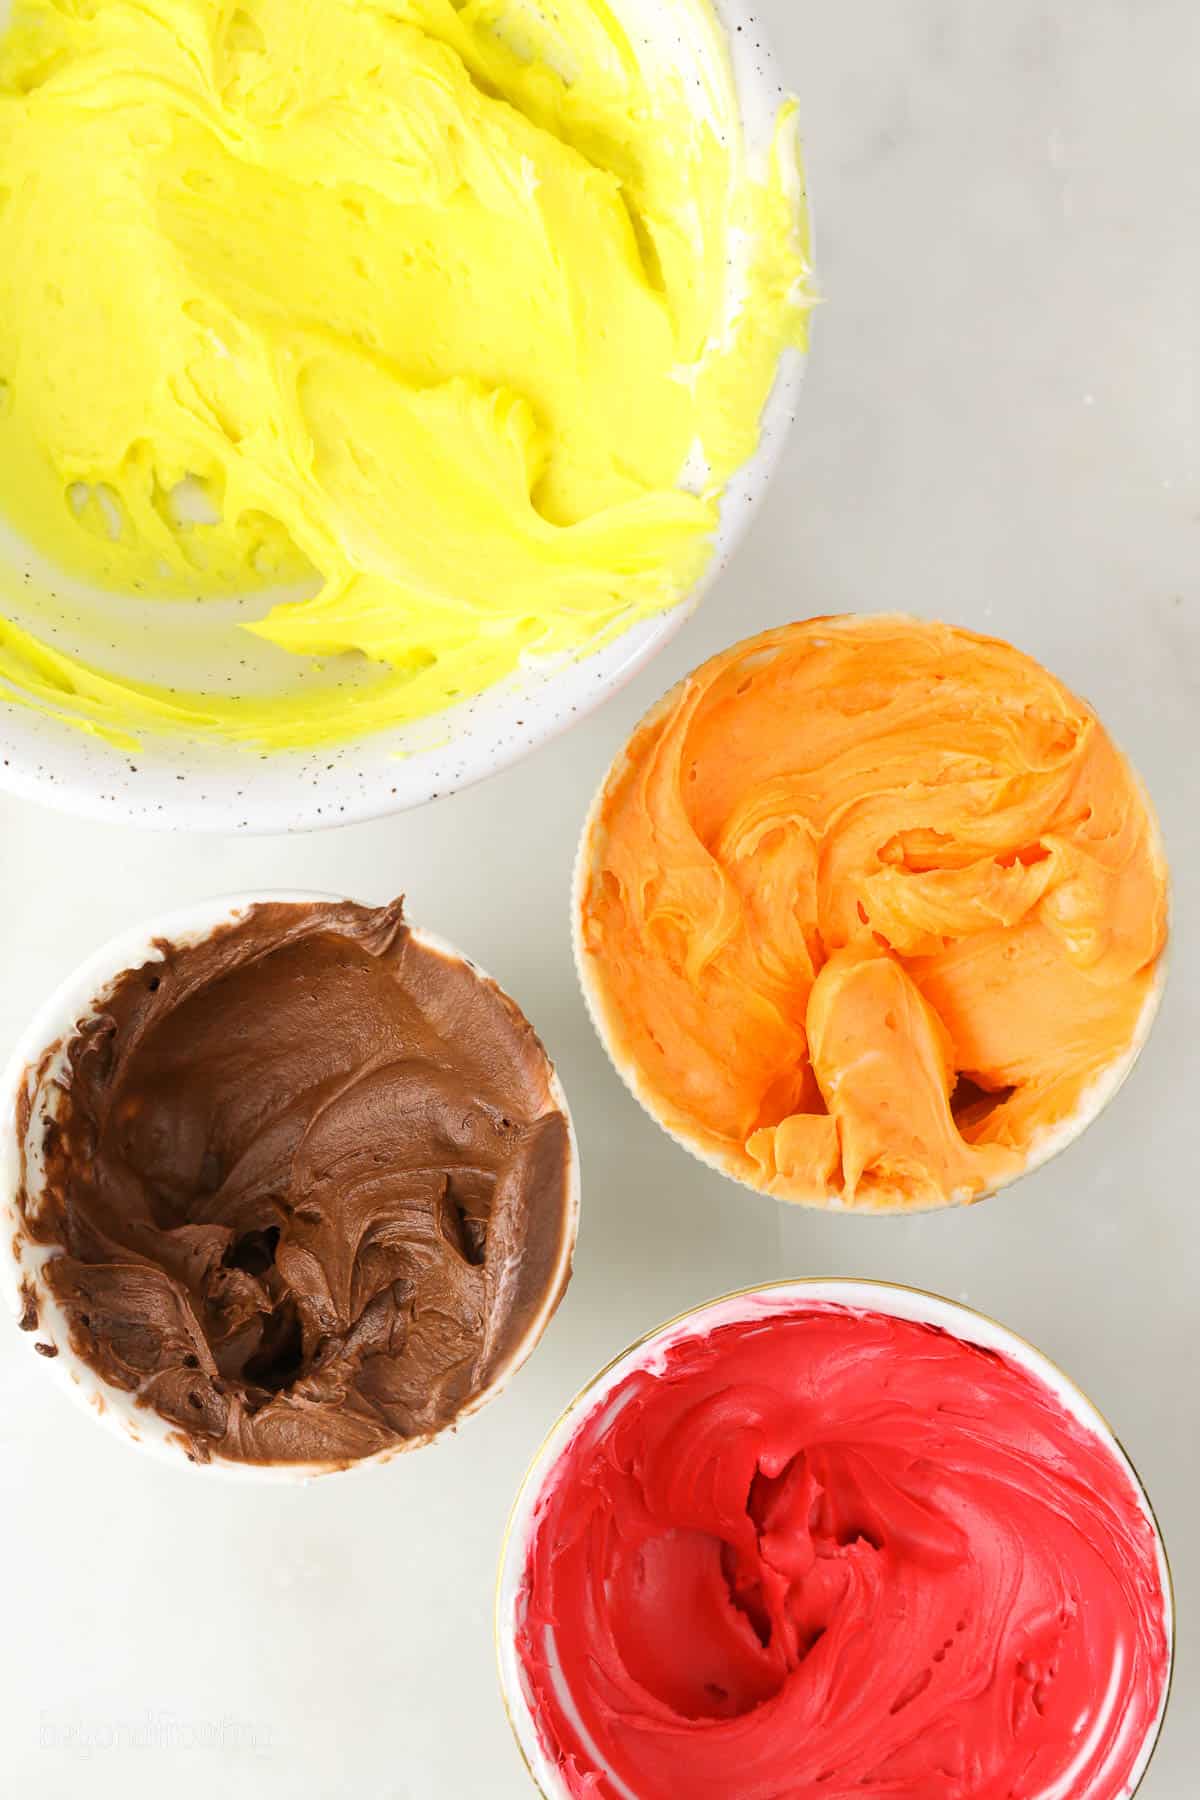 4 bowls with colored buttercream: yellow, brown, orange and red